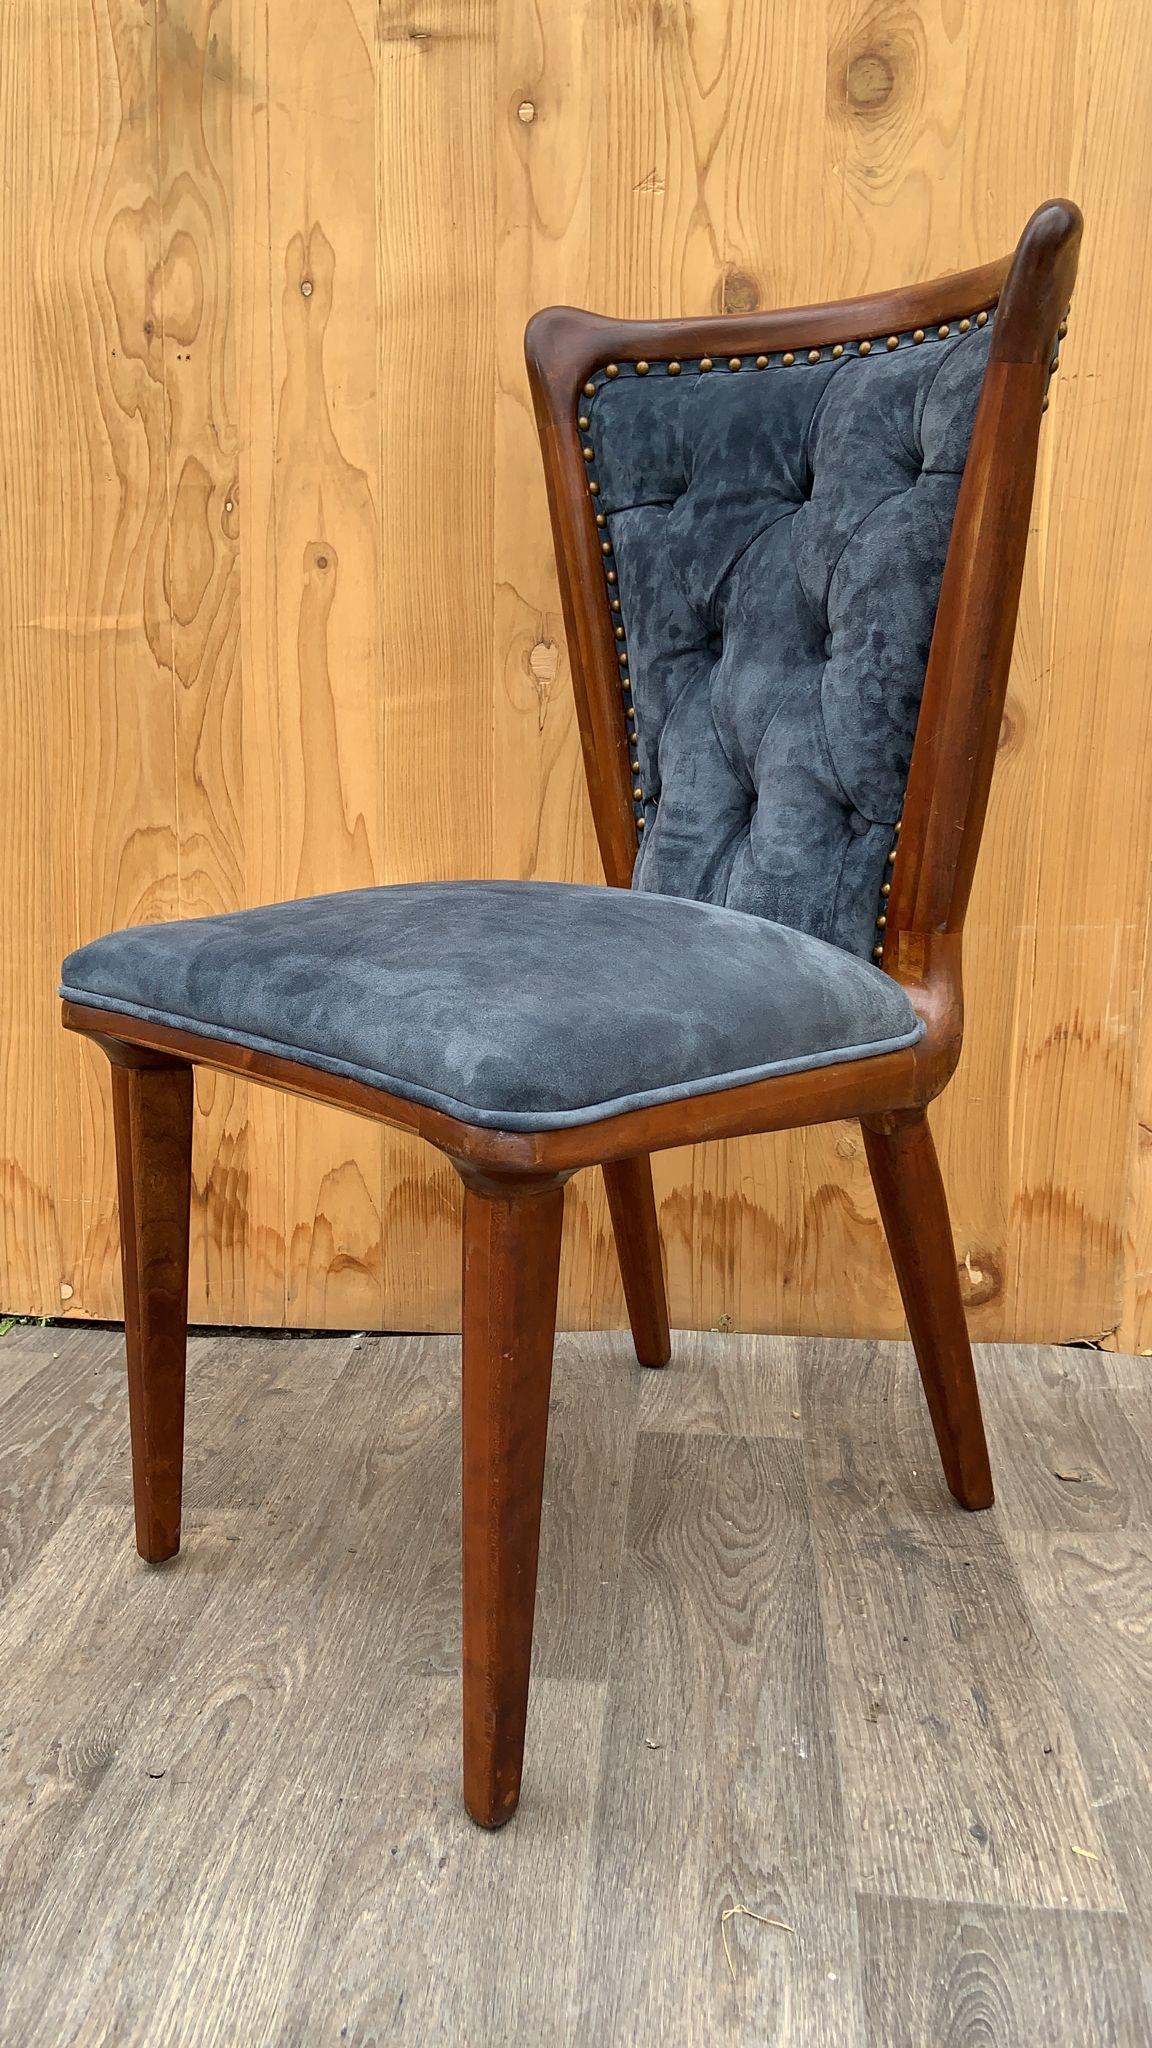 20th Century Art Deco Suede Sculptural Curved Back Dining Chairs Newly Upholstered - Set of 6 For Sale